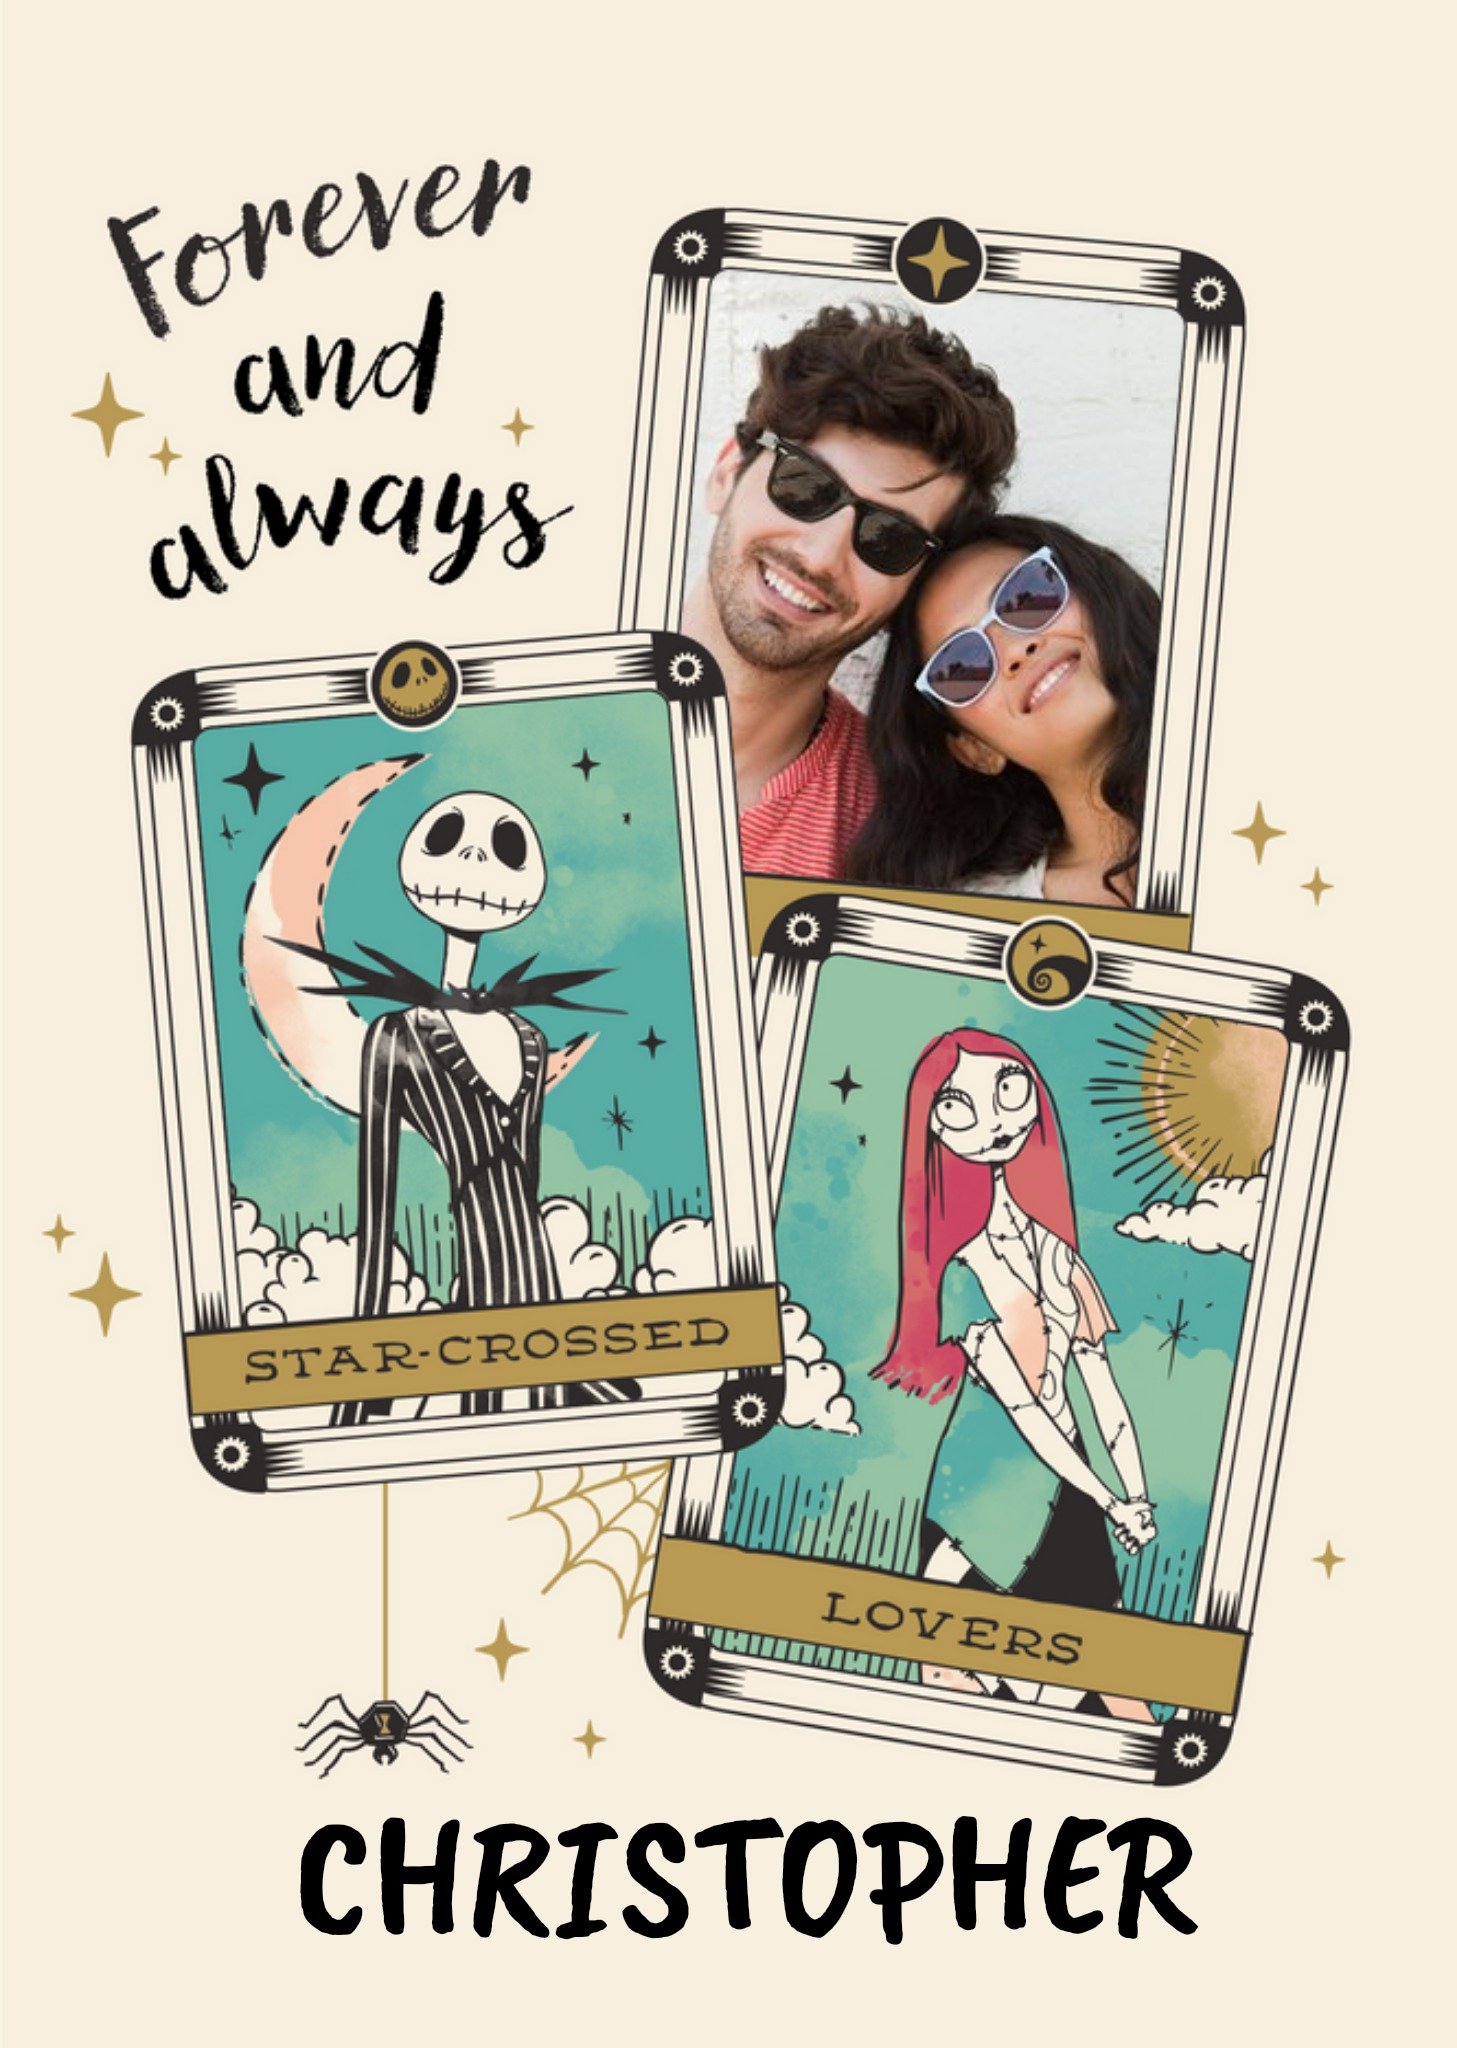 Disney Nightmare Before Christmas Jack Skellington And Sally Forever And Always Anniversary Card, La